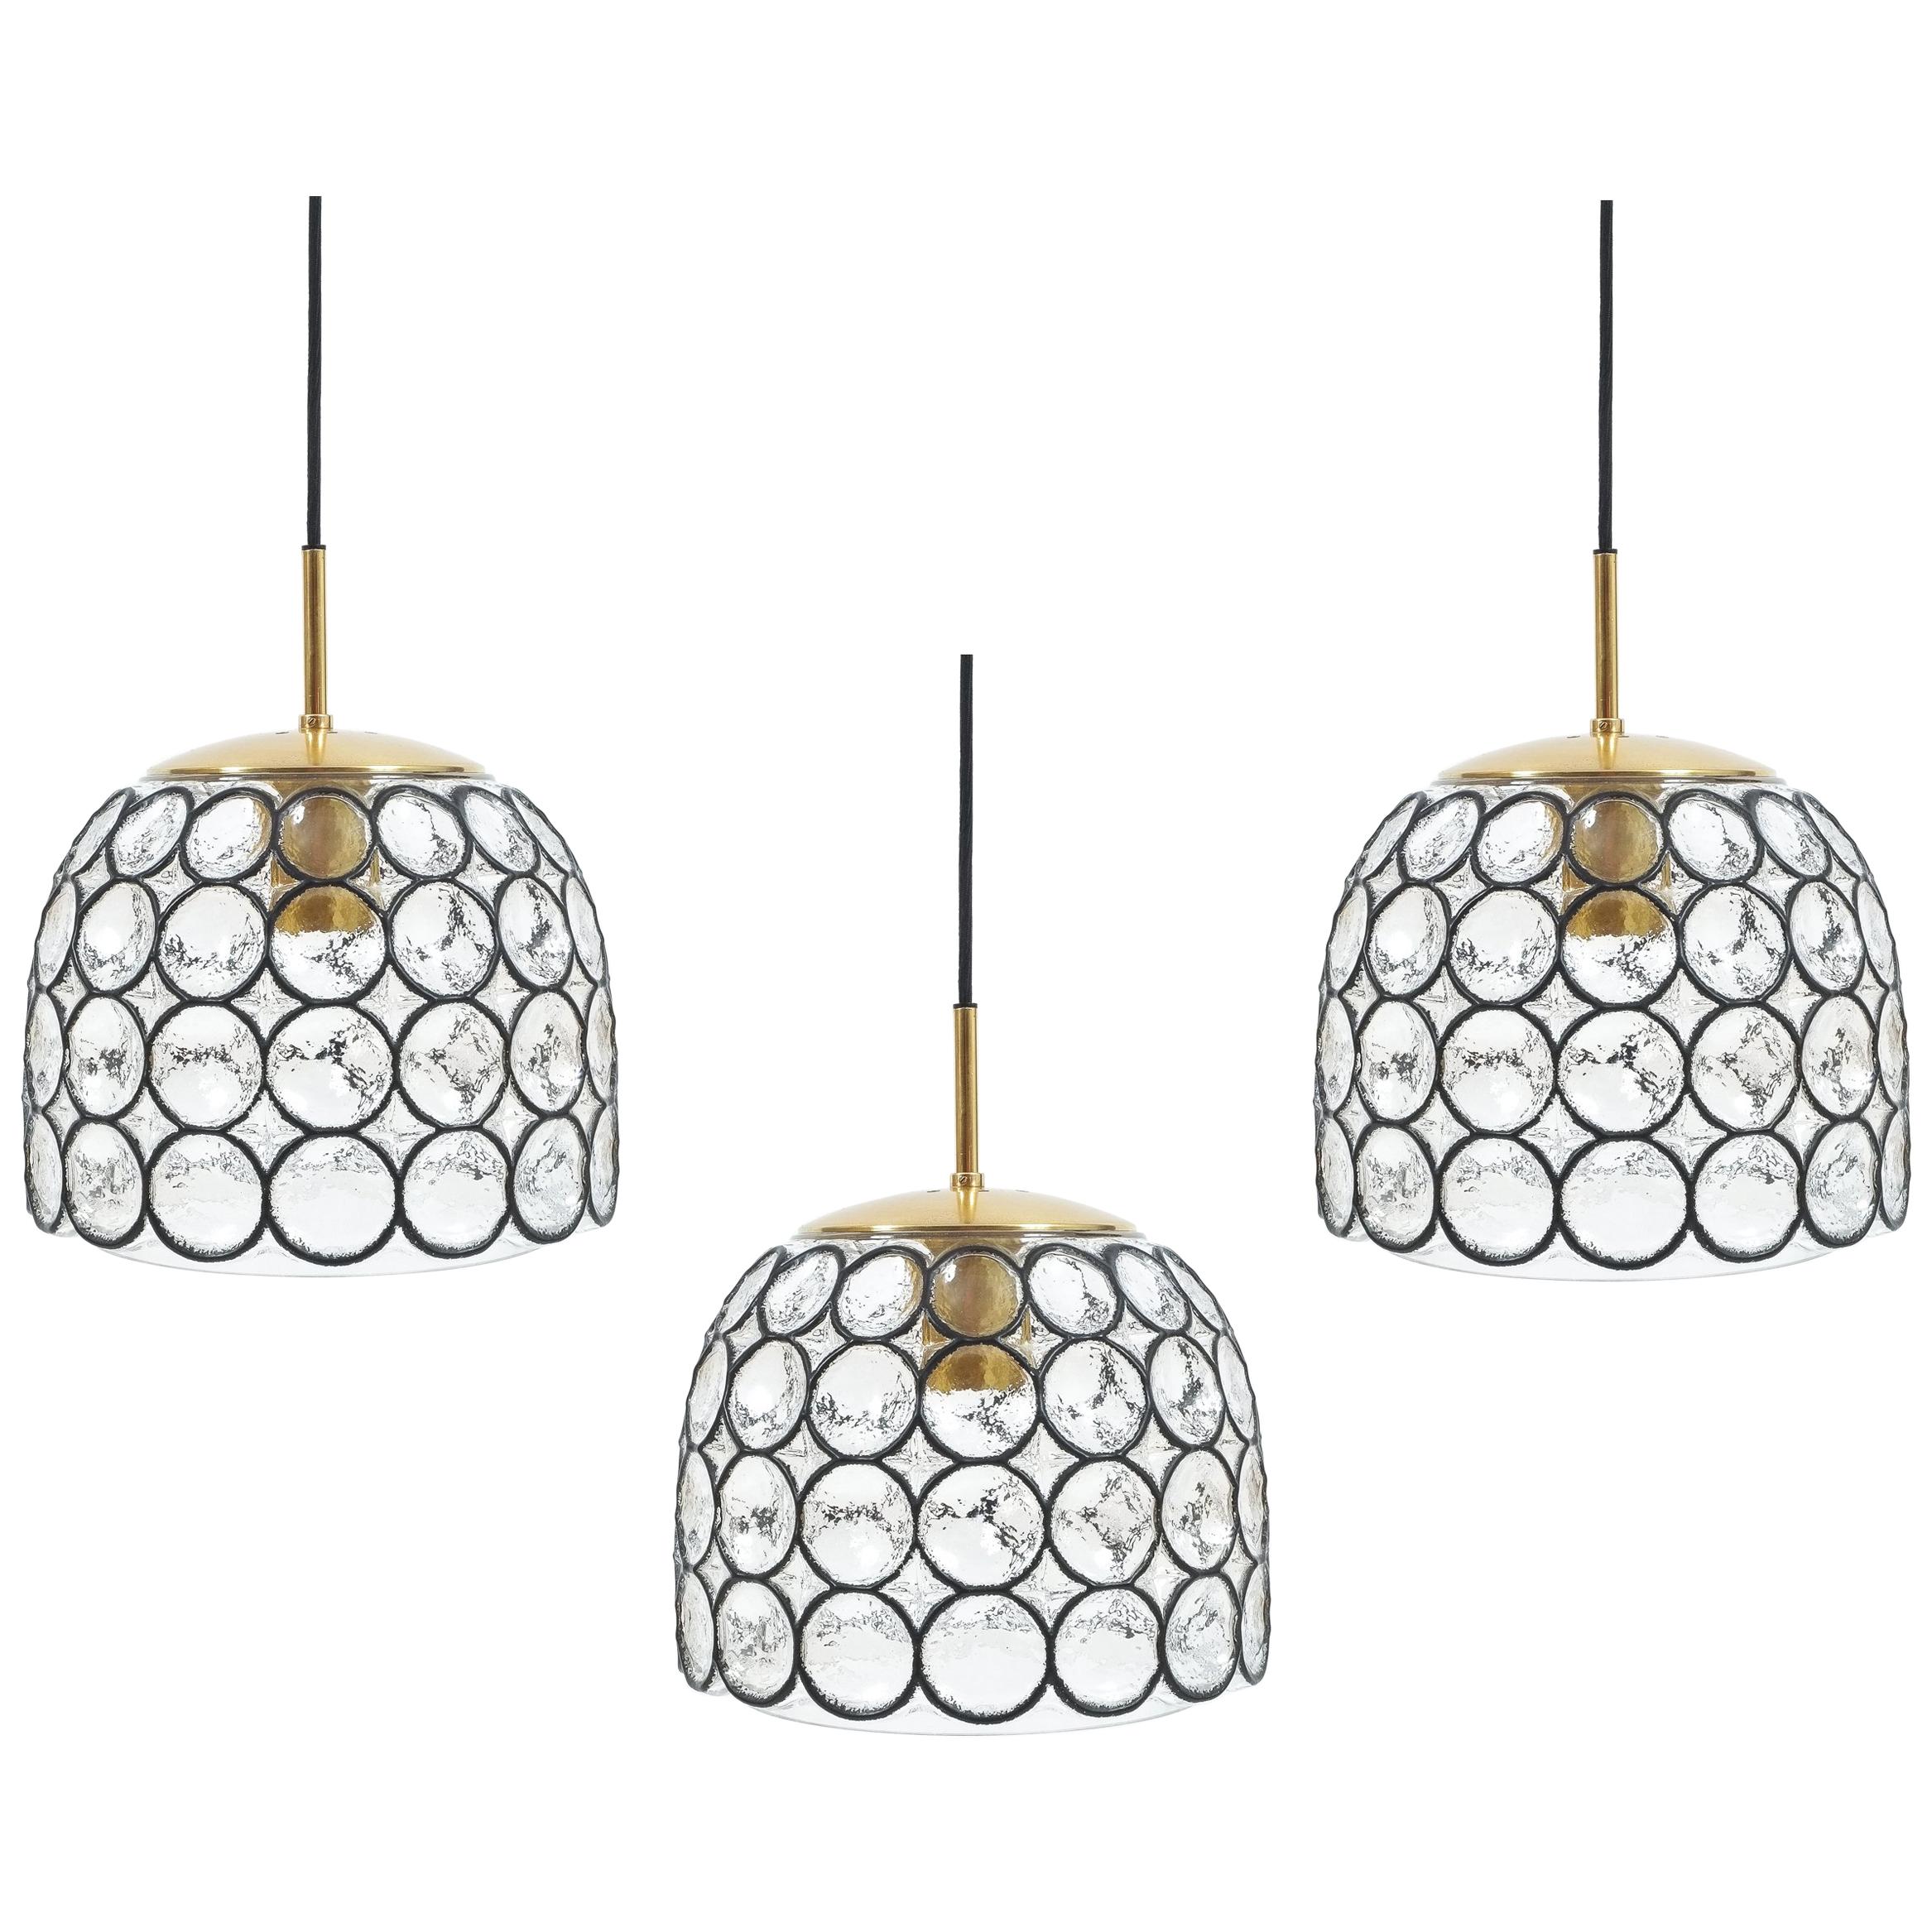 Refurbished Limburg One of Two Large Midcentury Iron and Glass Pendant Lamps